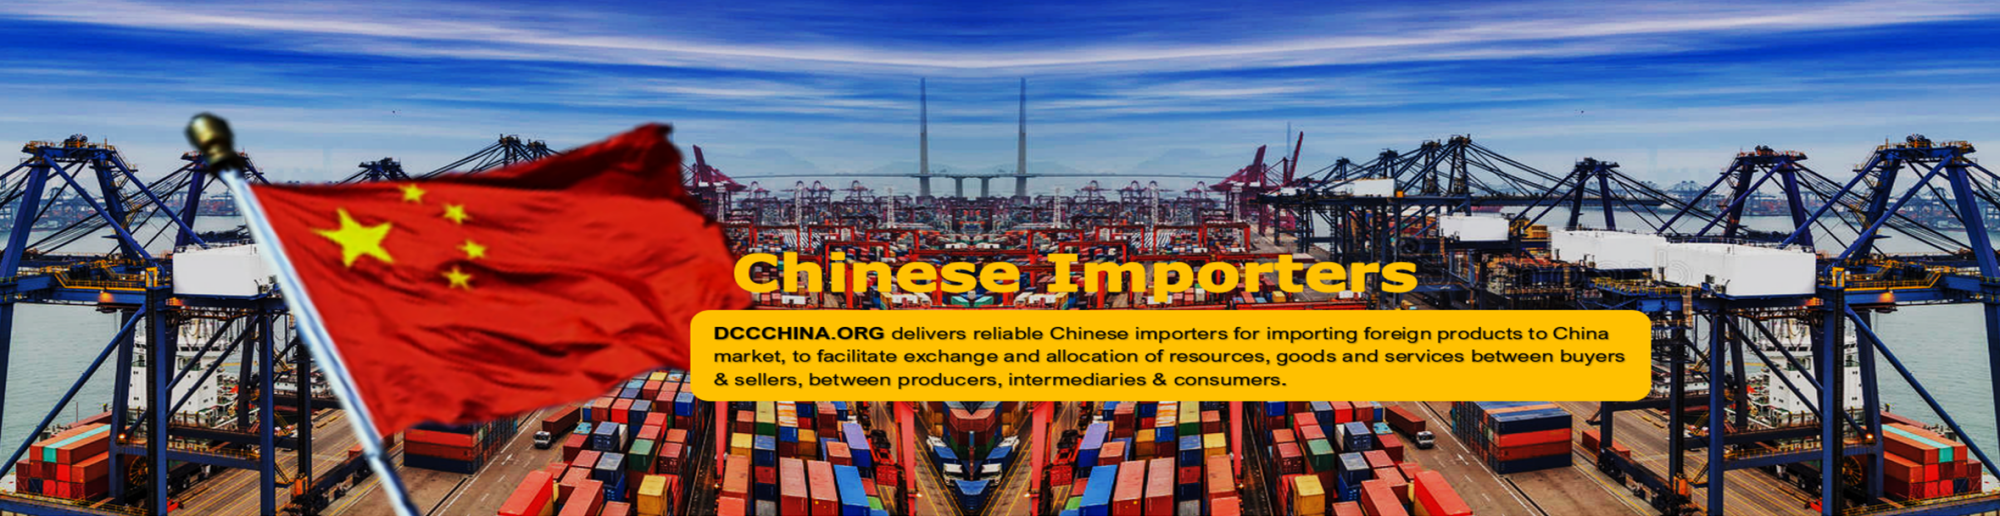 Chinese-Importers-in-China-Imports